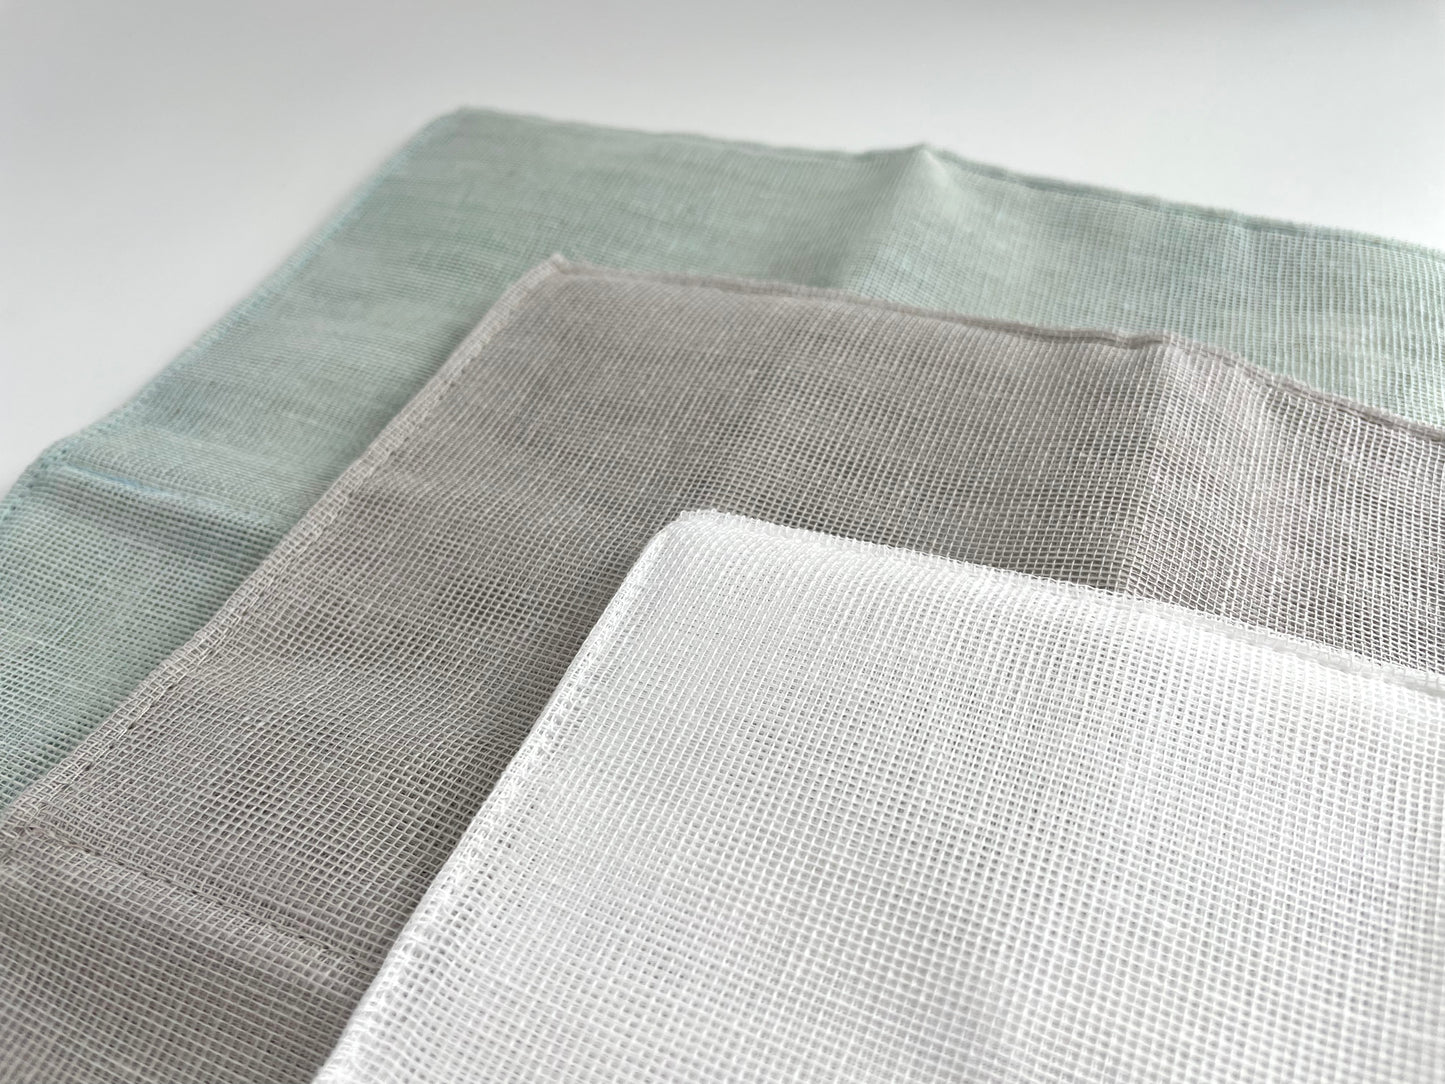 100 percent cotton mosquito net kaya Japanese kitchen cloth in grey, white, and celadon green